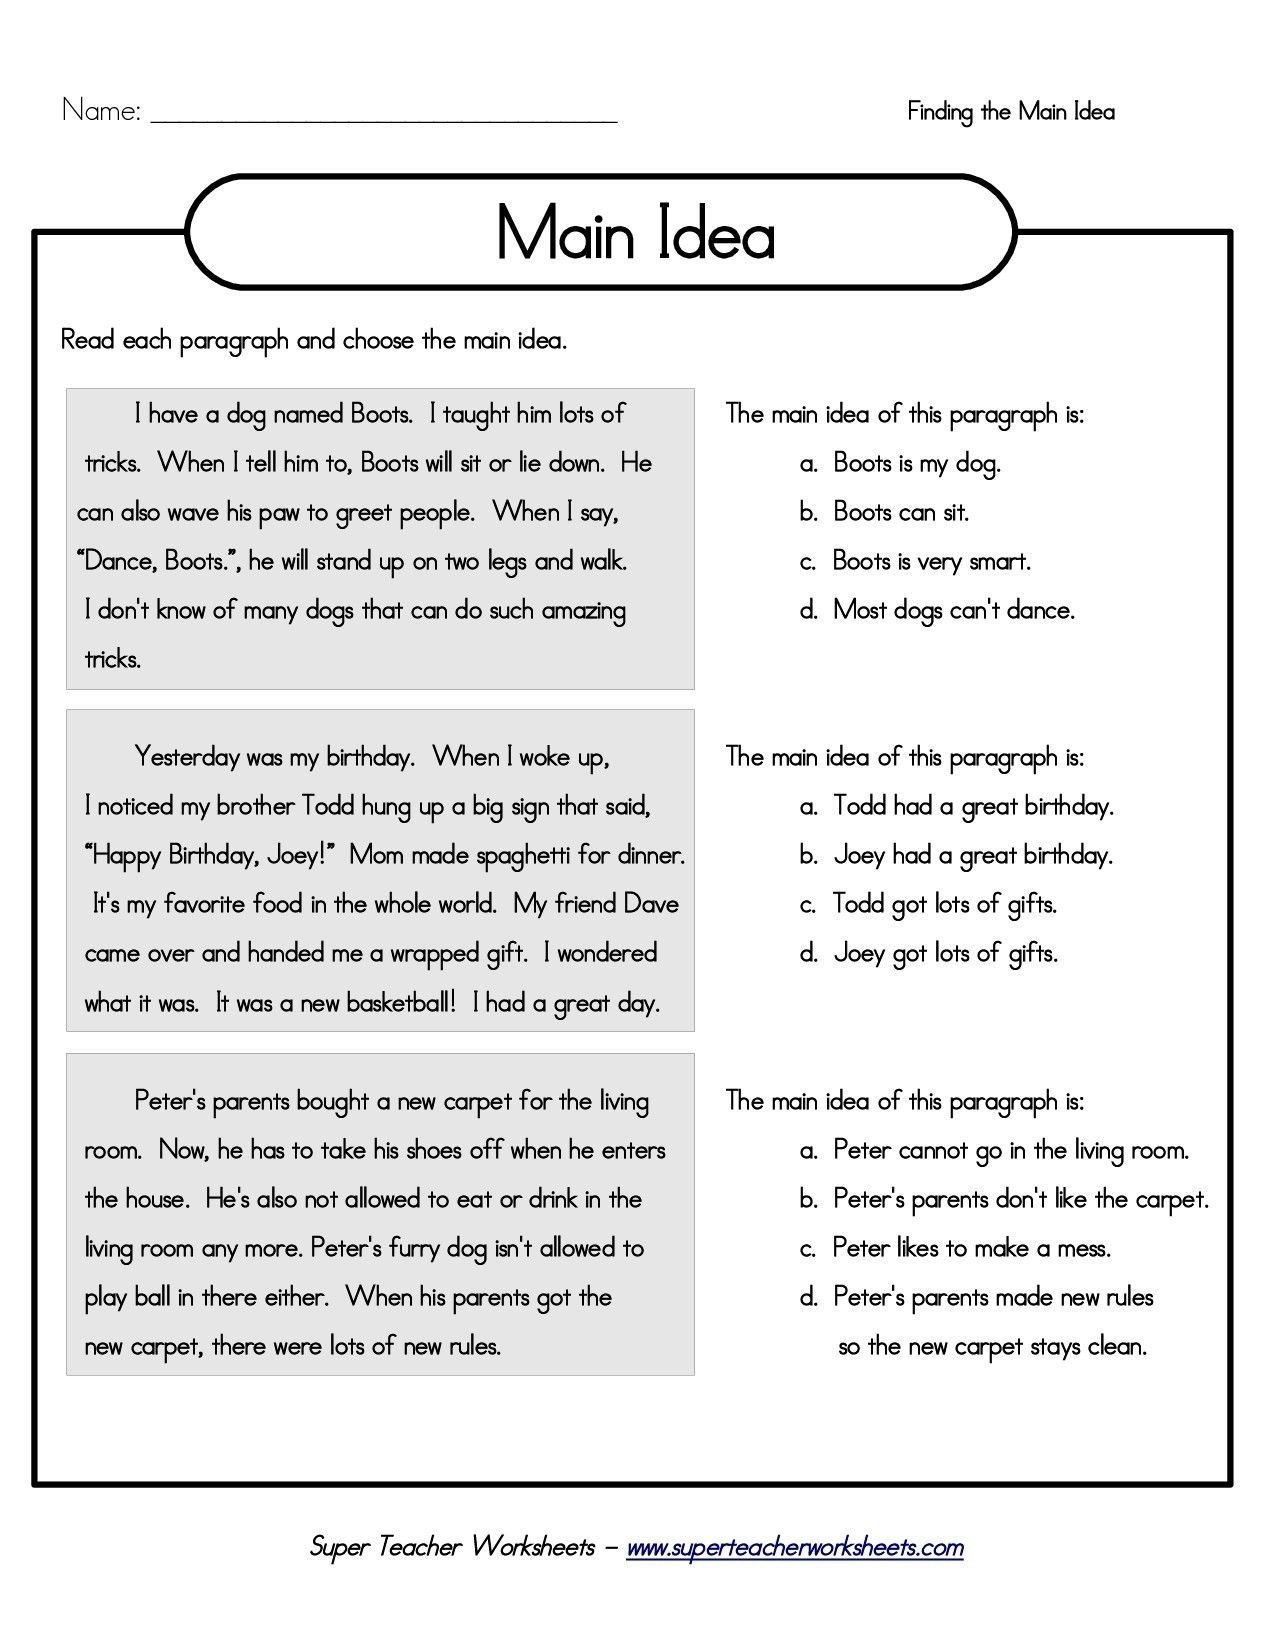 10 Spectacular Main Idea Worksheets For 5Th Grade printable 5th grade main idea worksheets main idea and details 43 2022